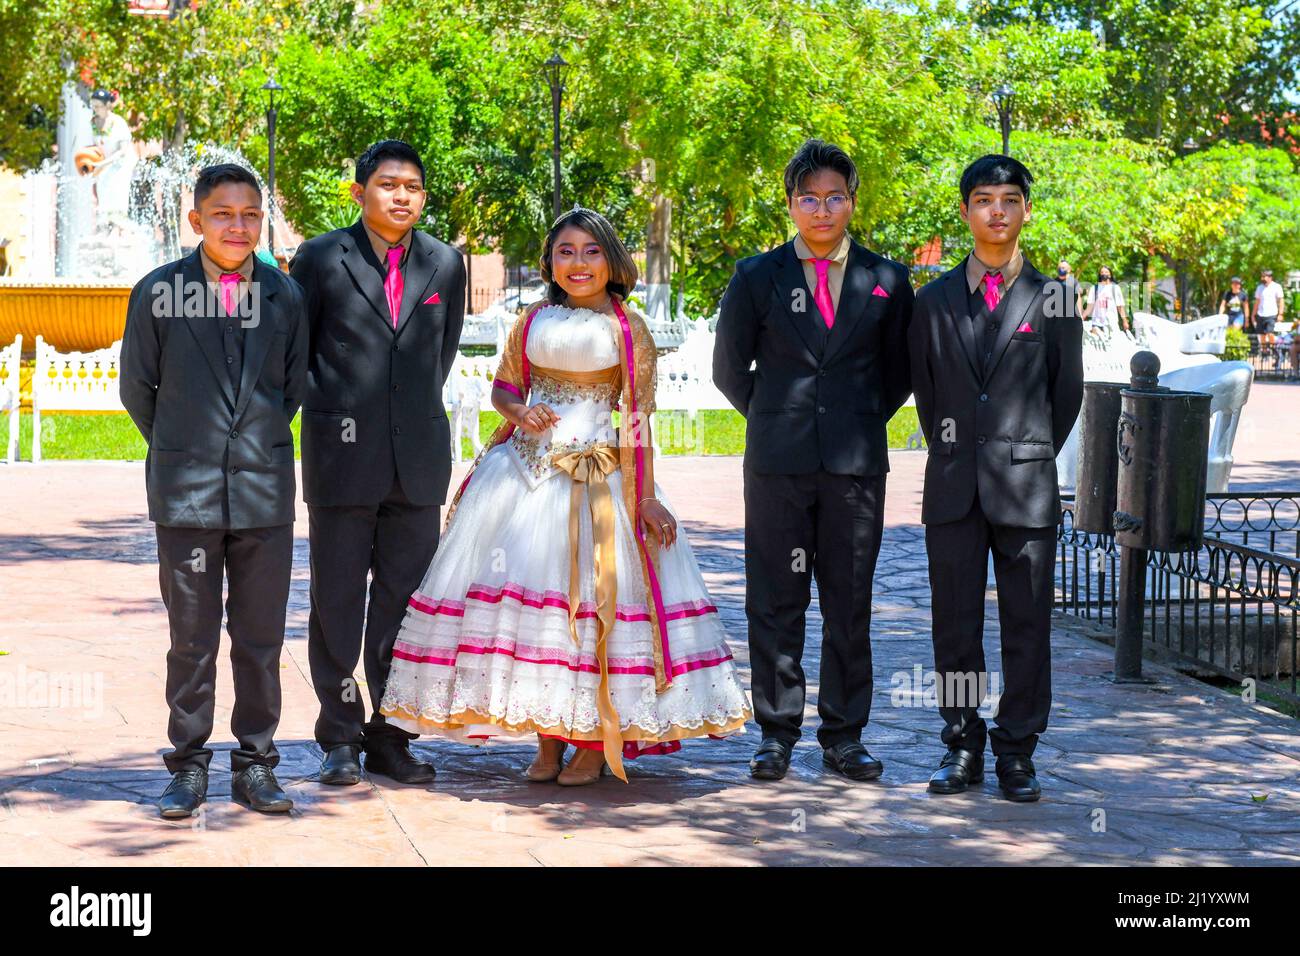 Quinceañera (Event for 15th birthday) of a girl, Valladolid , Mexico Stock Photo